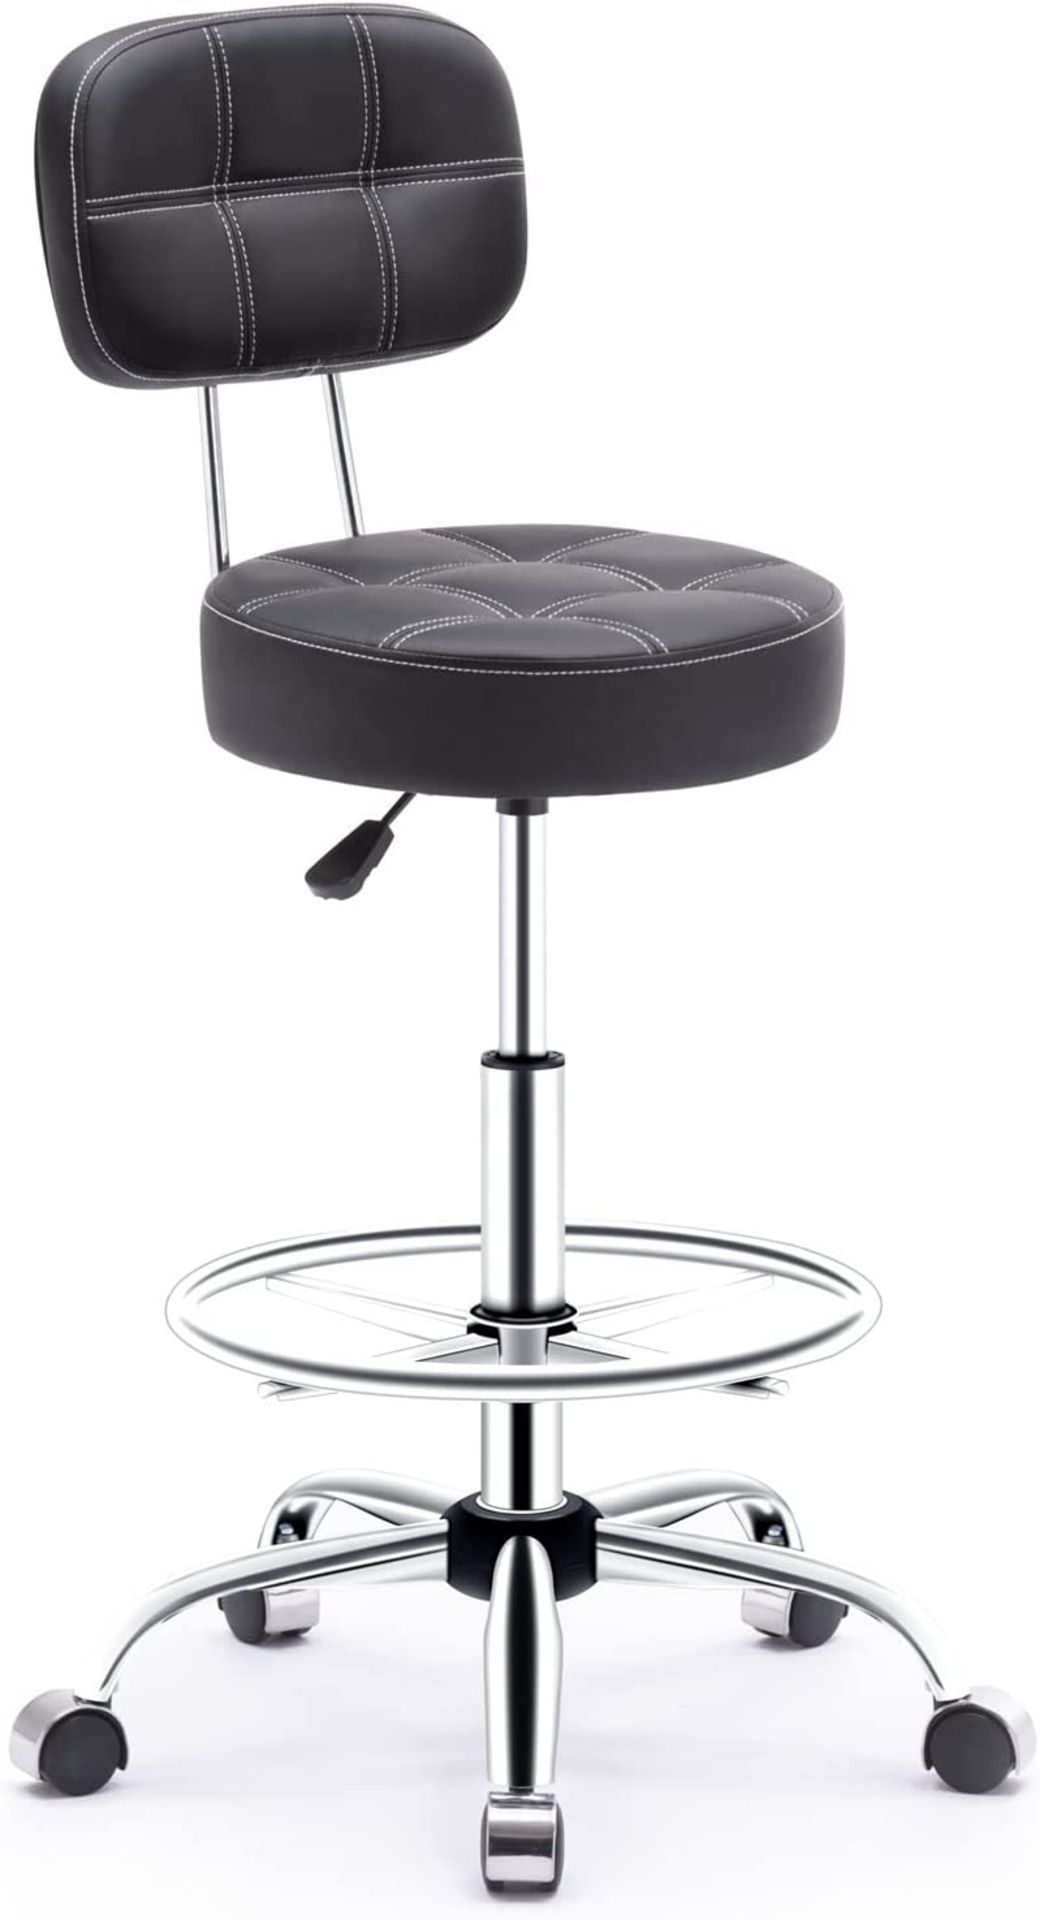 NEW Rolling stool with High Backrest and Adjustable Footrest, Leather Massage Stool Ergonomic